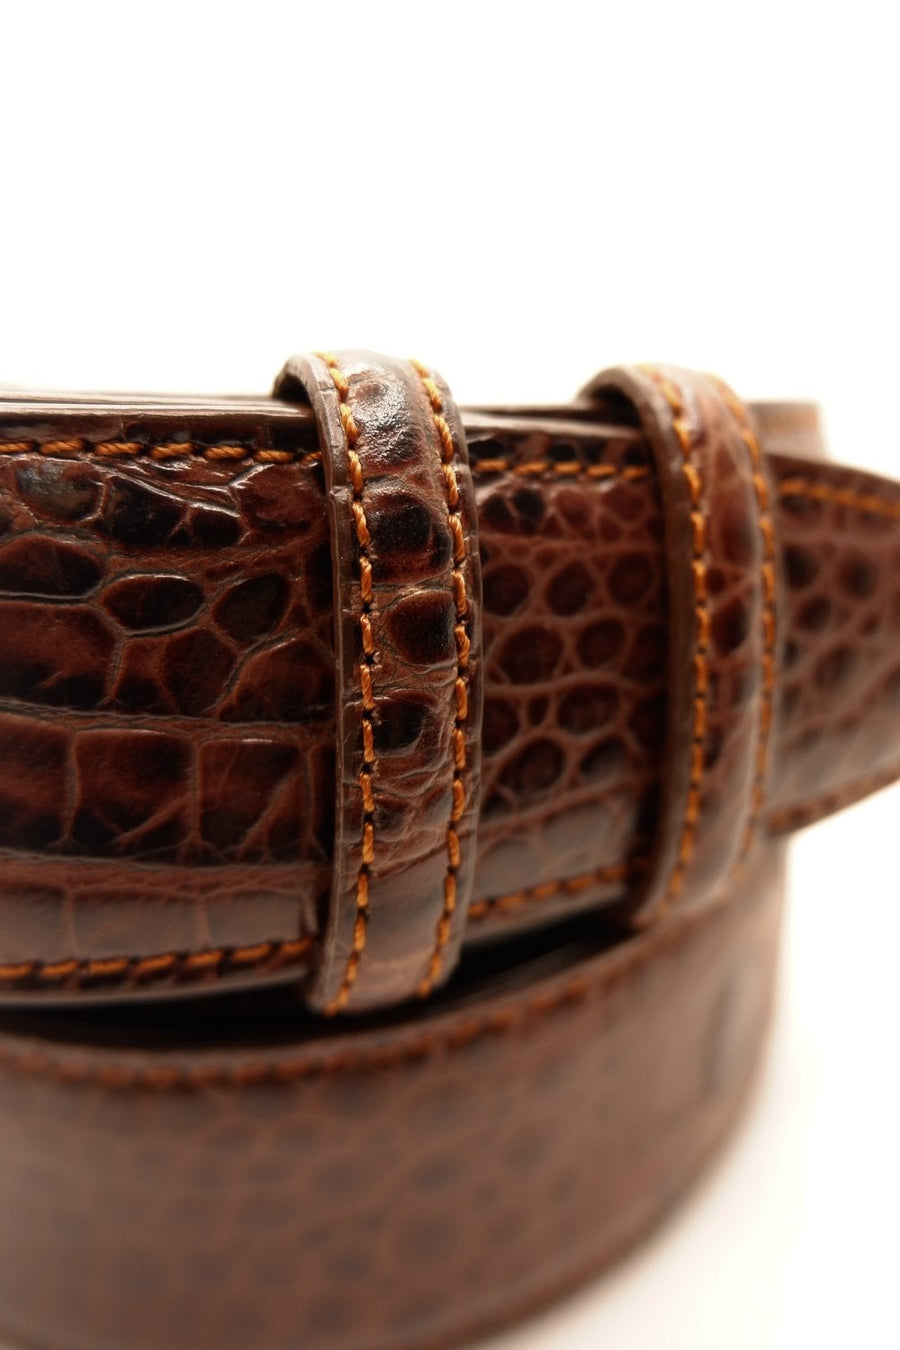 Buy the Elliot Rhodes Croc Jenny Belt in Brown/Black at Intro. Spend £50 for free UK delivery. Official stockists. We ship worldwide.